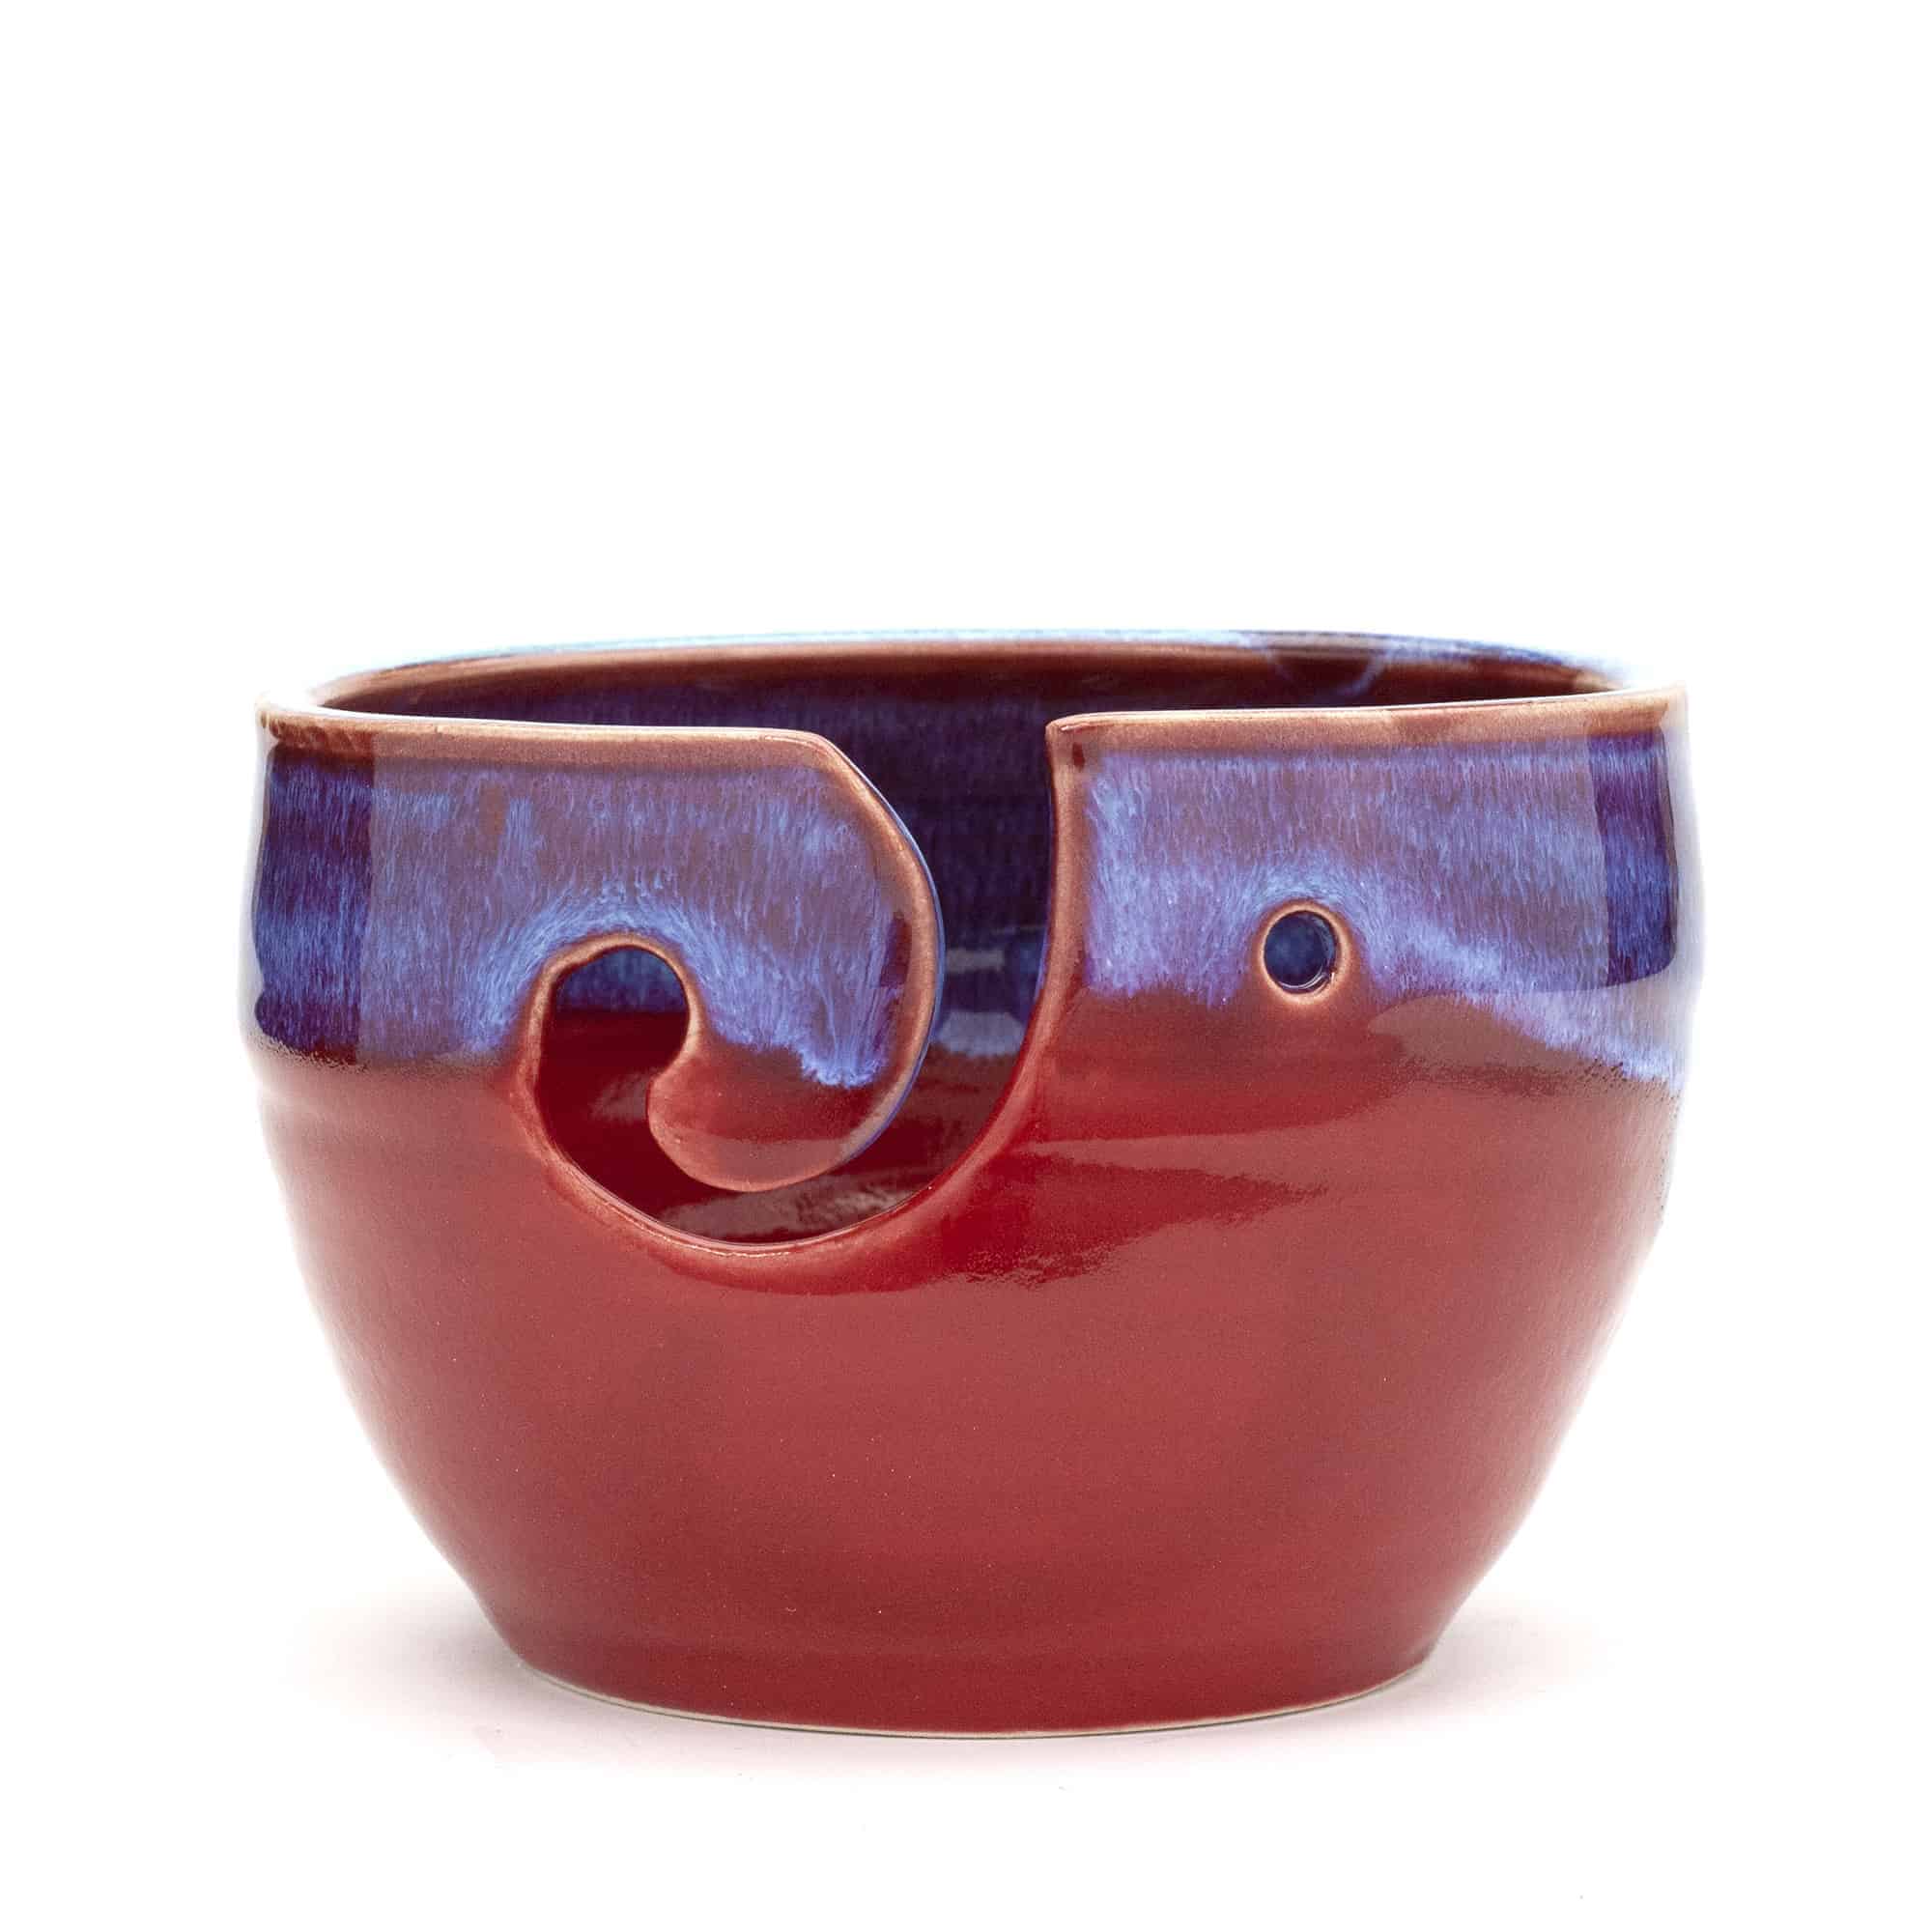 Pets - Crazy Cat Lady - Yarn Bowl - 6 in.